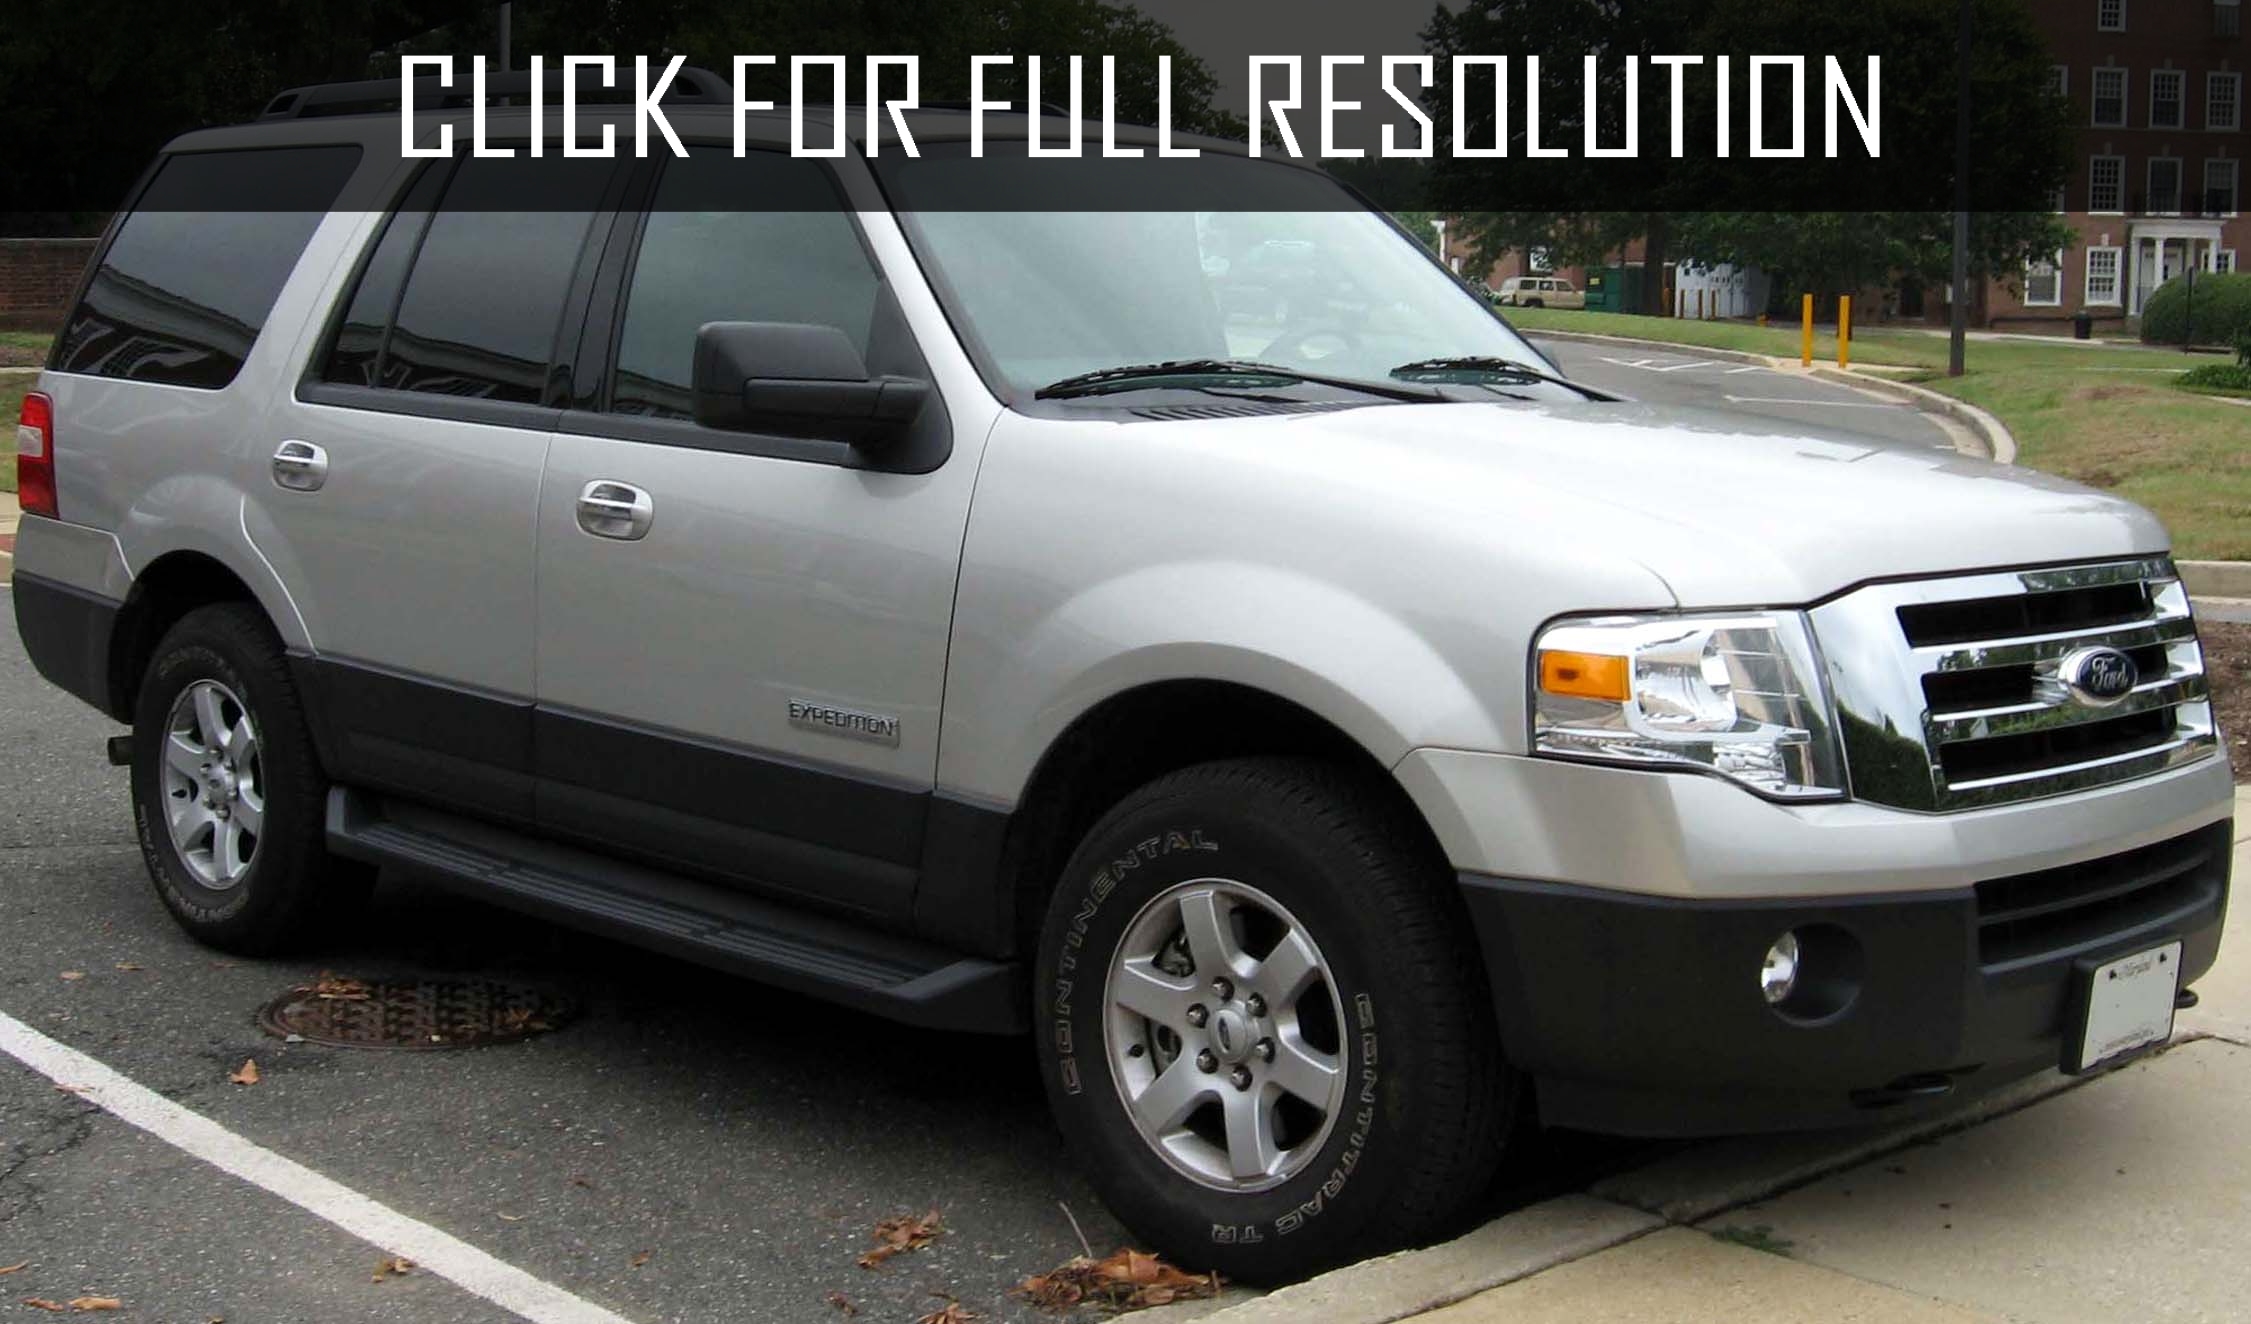 2011 Ford Expedition Xlt